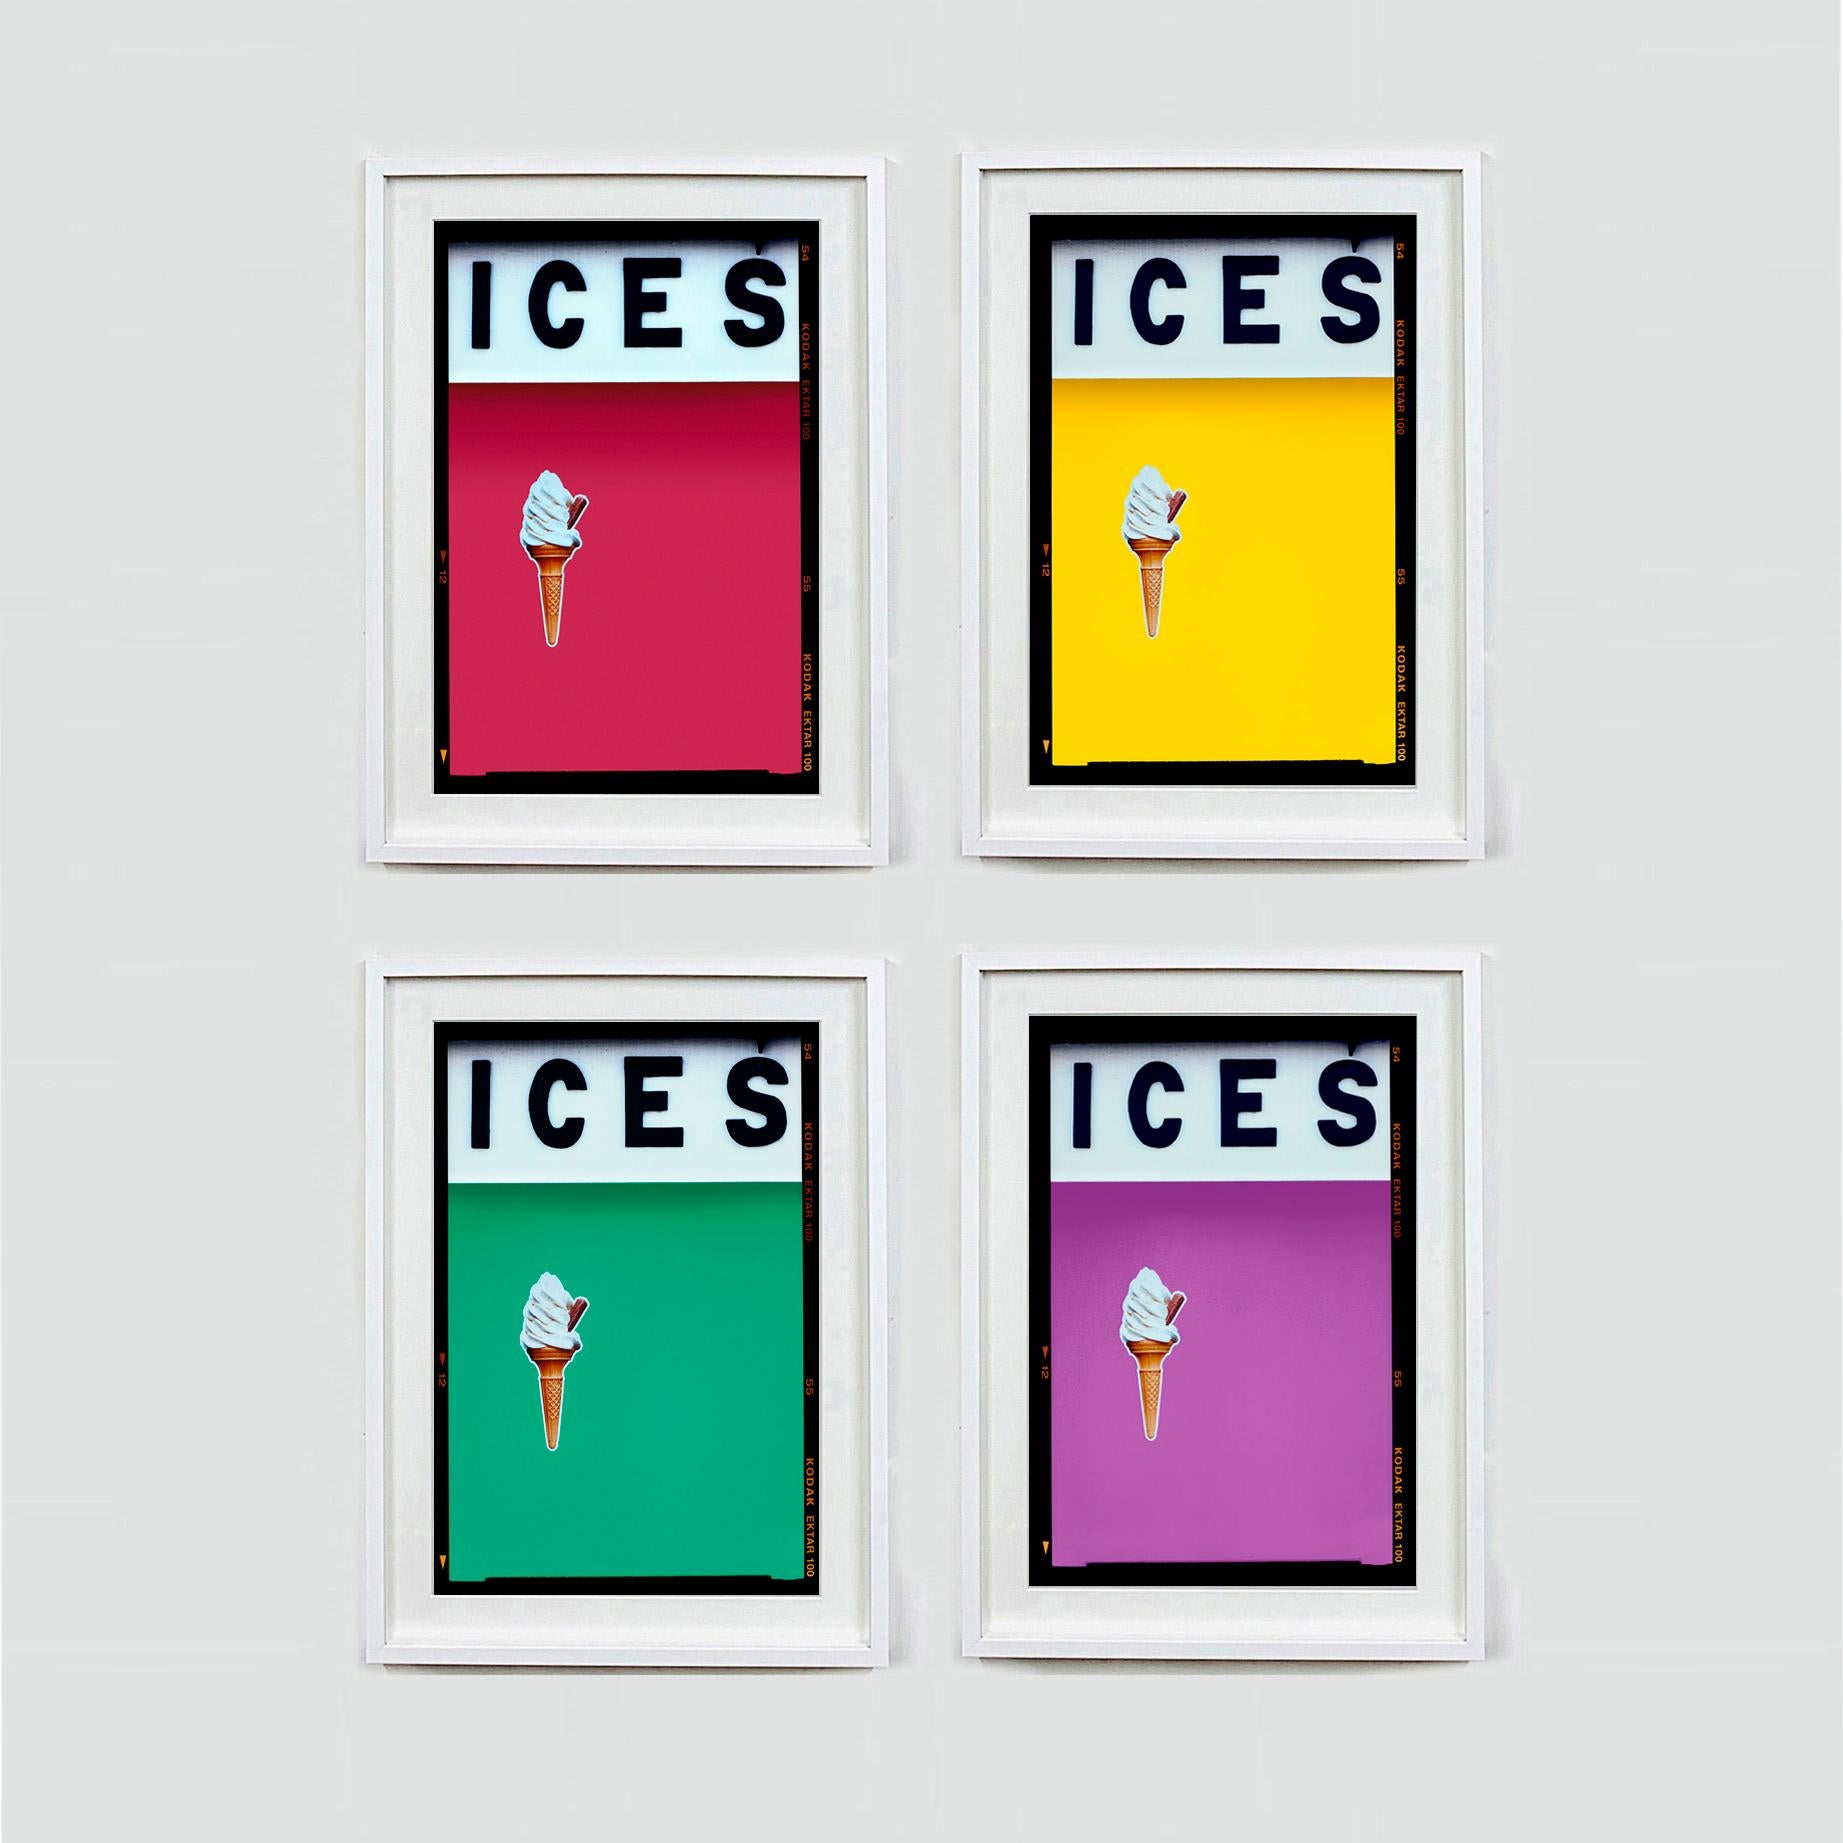 ICES, by Richard Heeps, photographed at the British Seaside at the end of summer 2020. This artwork is about evoking memories of the simple joy of days by the beach. The plum purple color blocking, typography and the surreal twist of the suspended